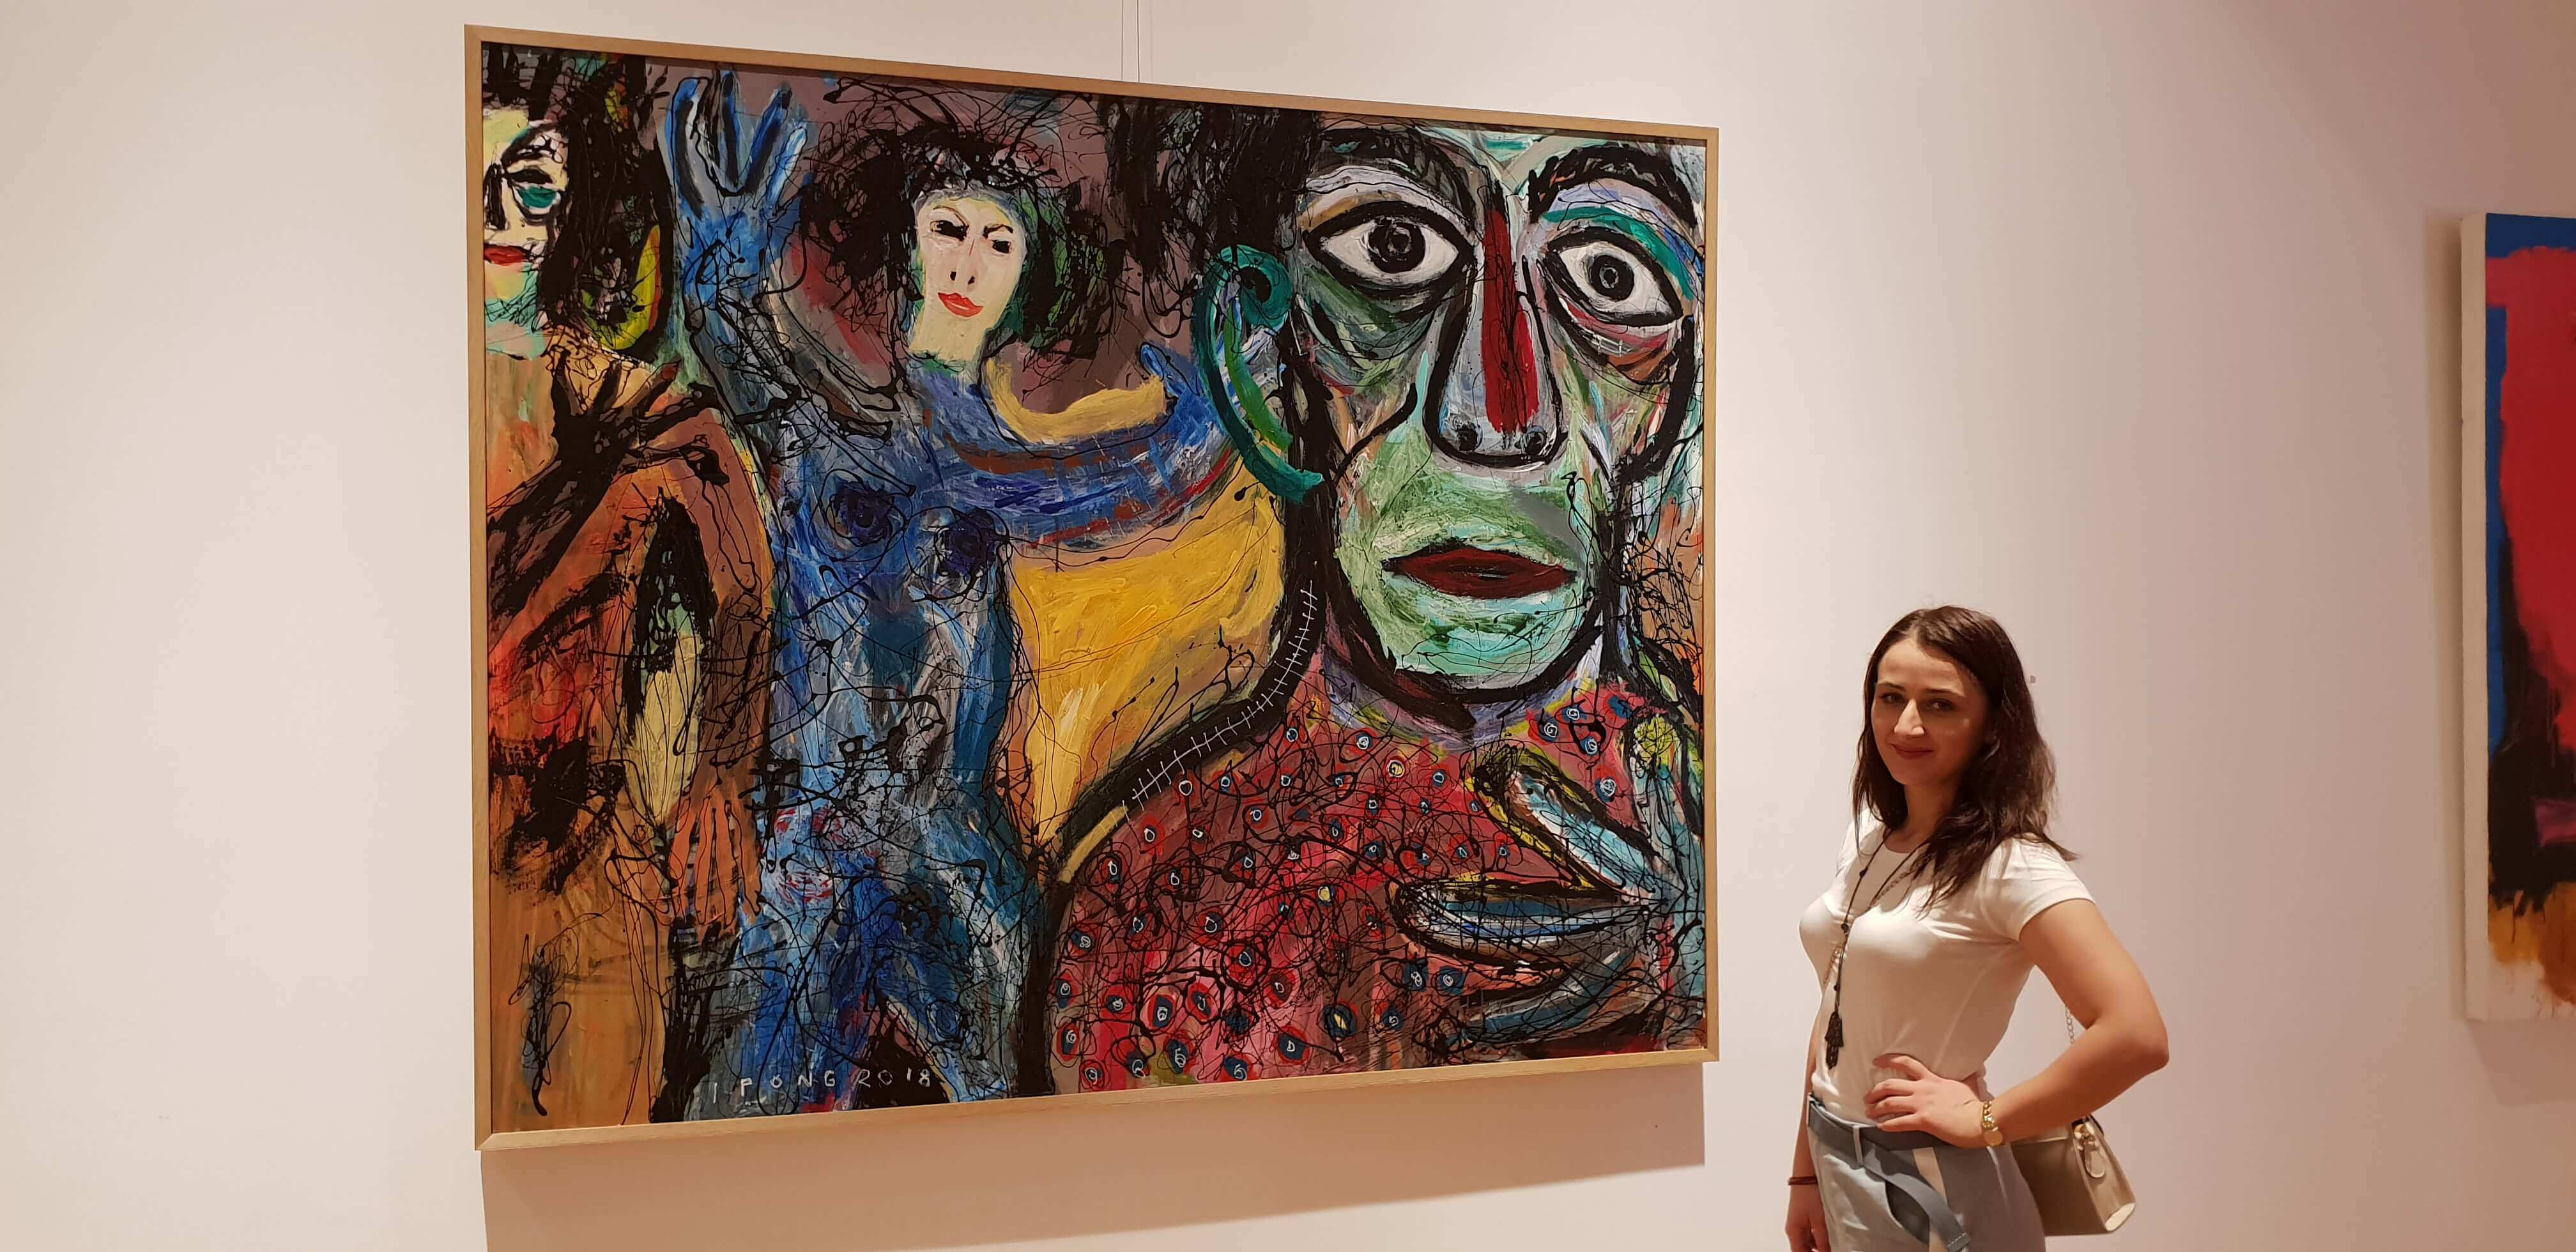 My friend Marinela posing with one of the contemporary works at the museum